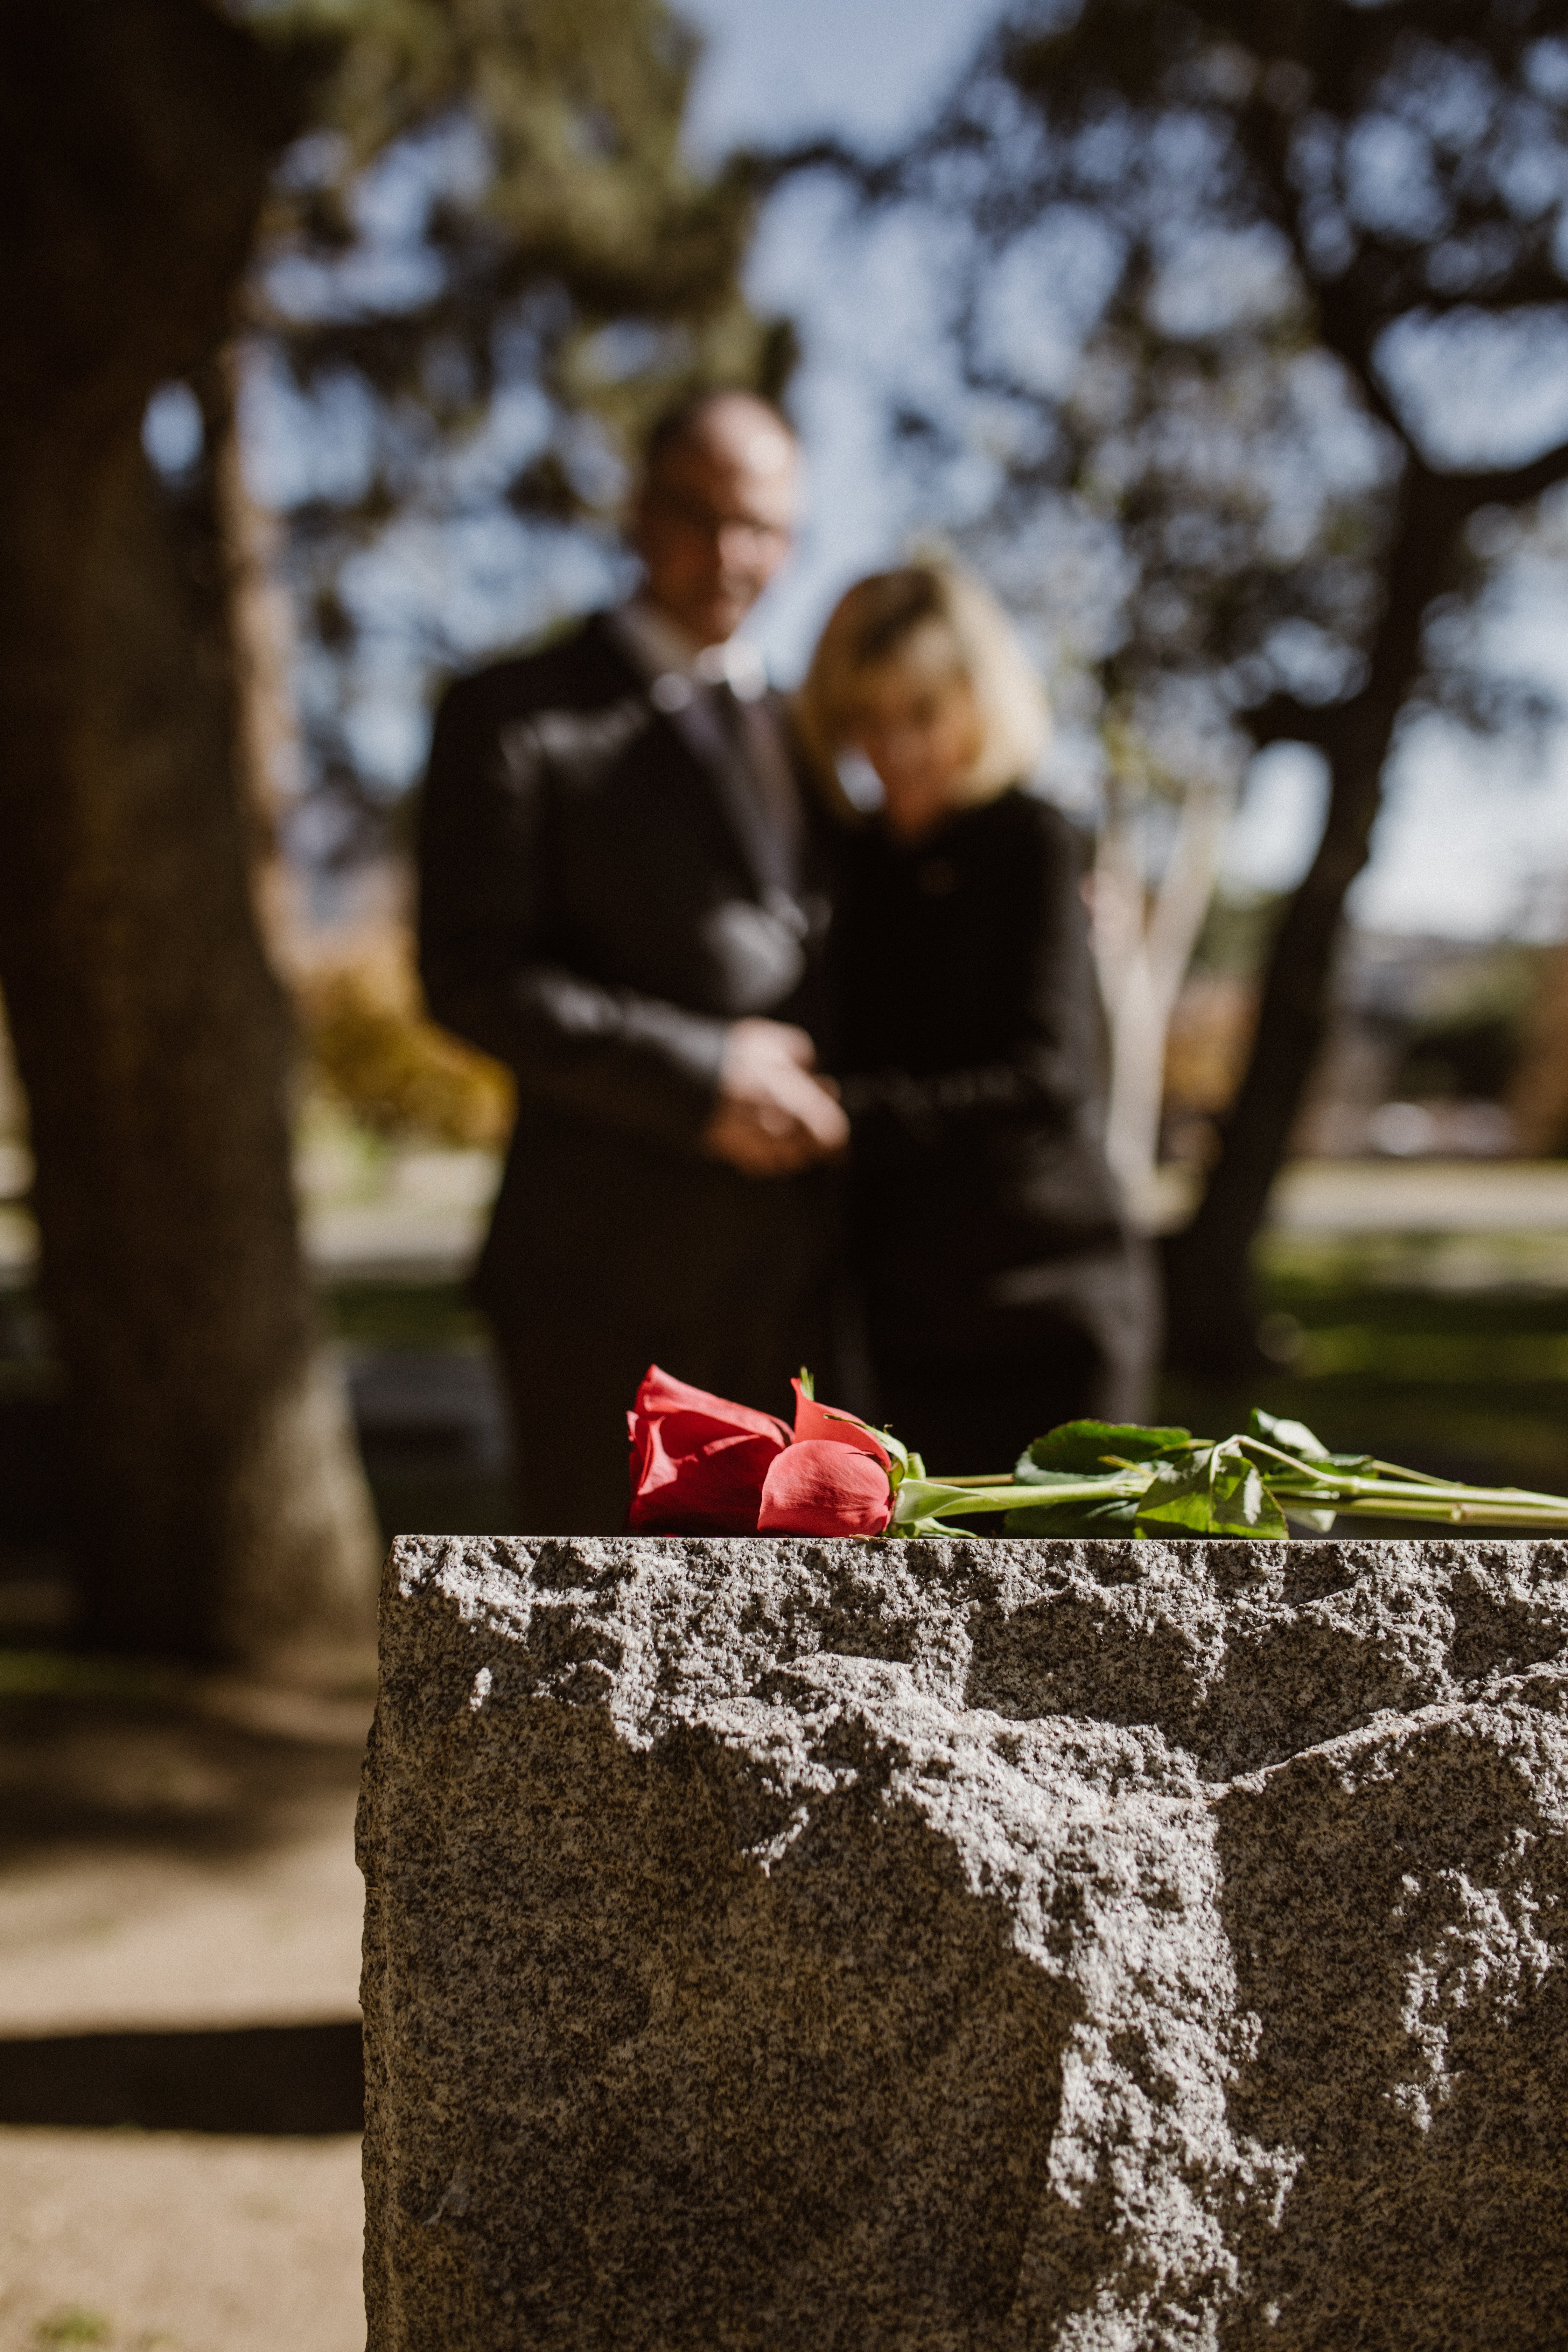 Travis and Scarlett decided to find Maggie's gravesite. | Source: Pexels